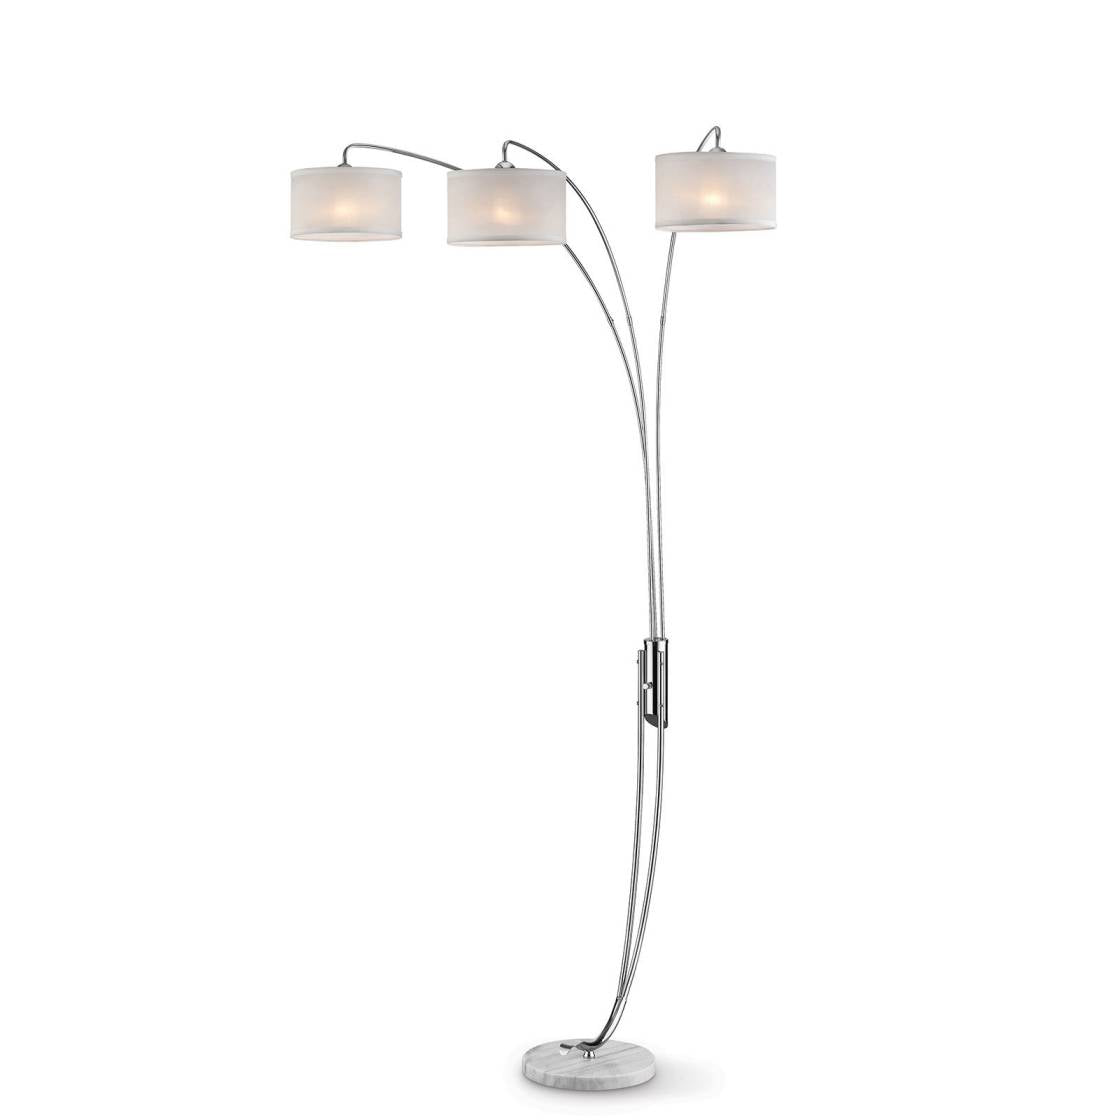 Modern Metal Arch Lamp With 3 Shades And Marble Base, Silver And Off White By Benzara